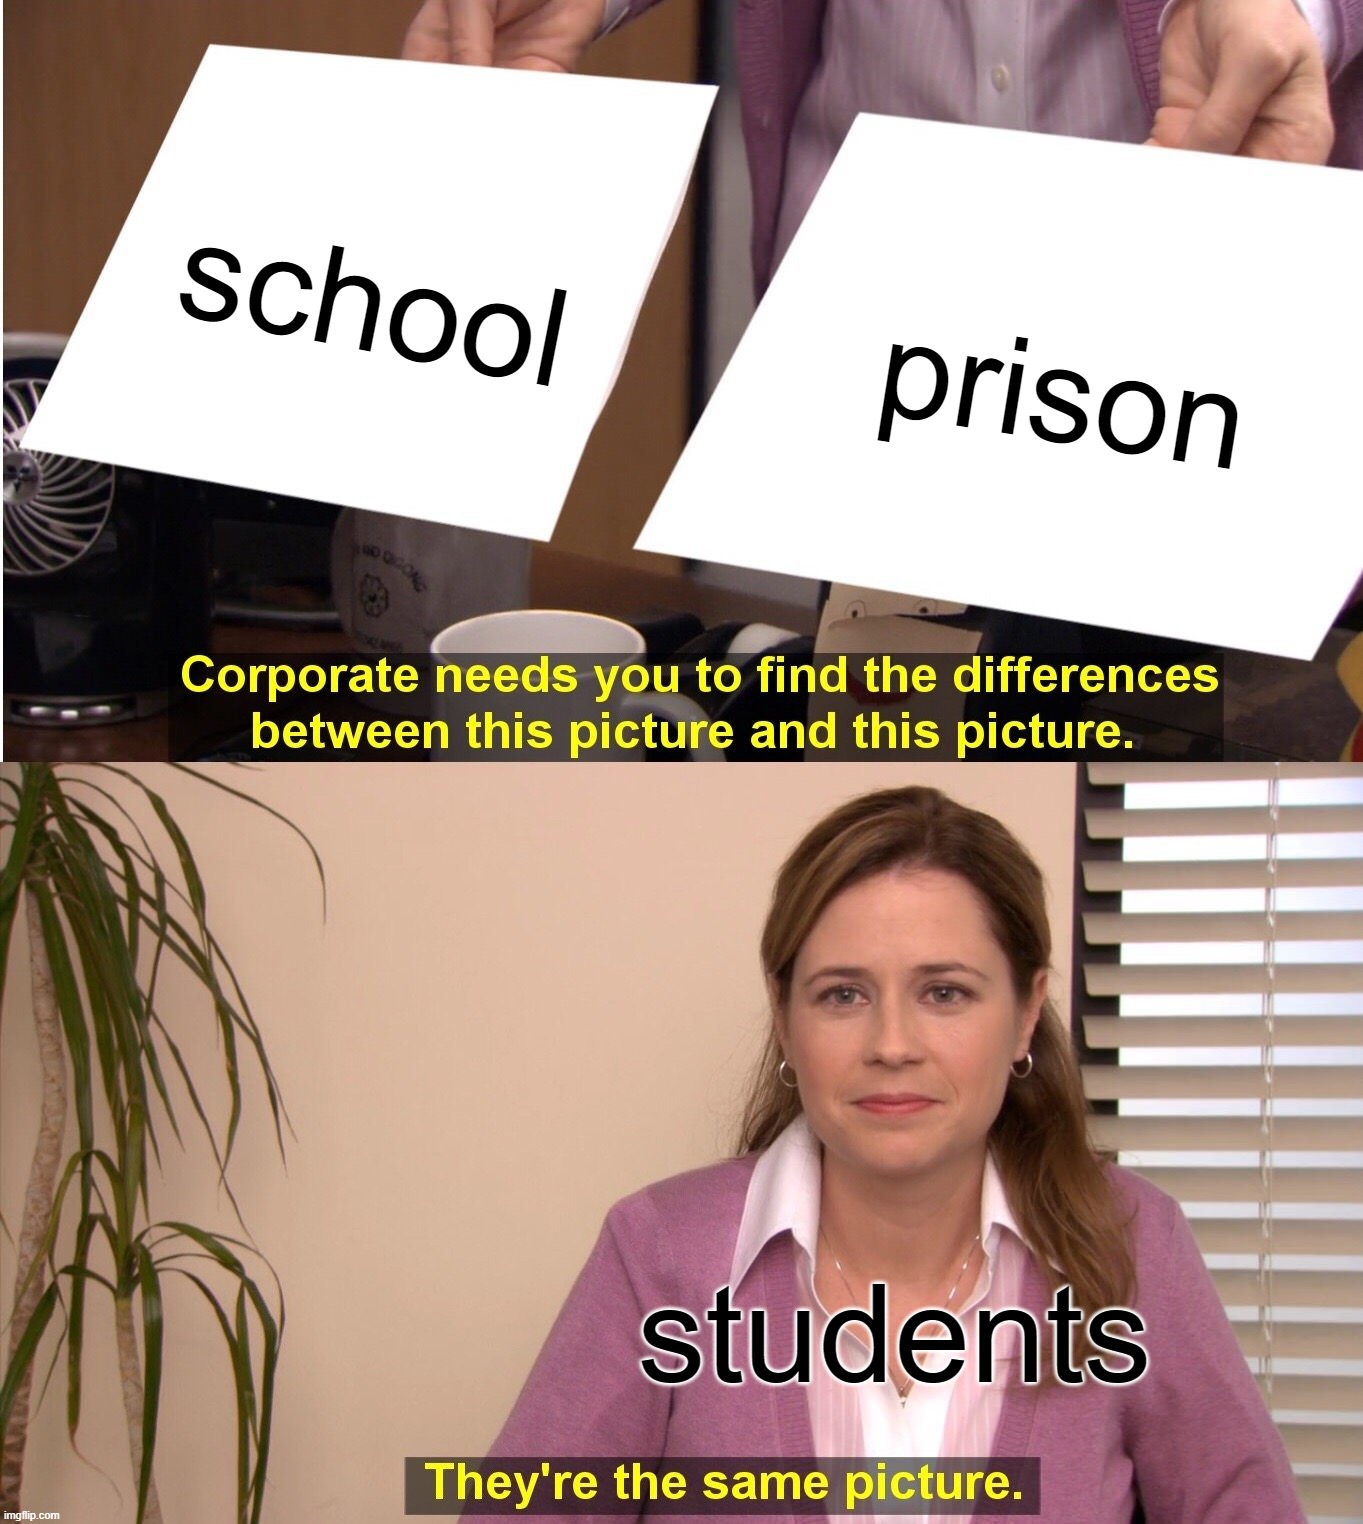 They're The Same Picture Meme | school; prison; students | image tagged in memes,they're the same picture | made w/ Imgflip meme maker